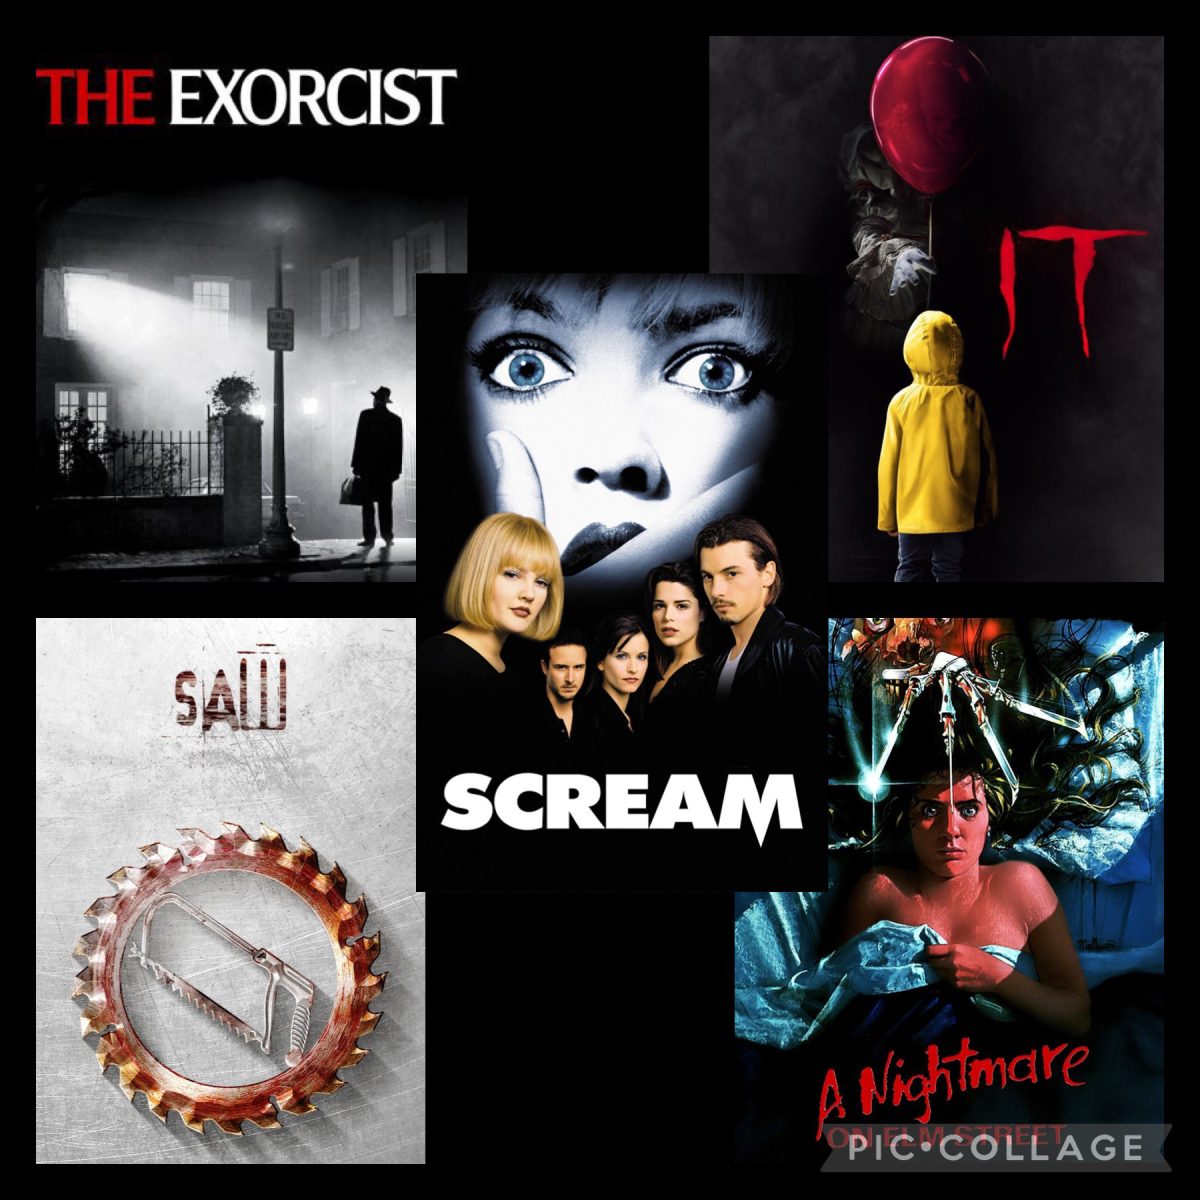 Top 5 thrilling scary movies to watch this Halloween season